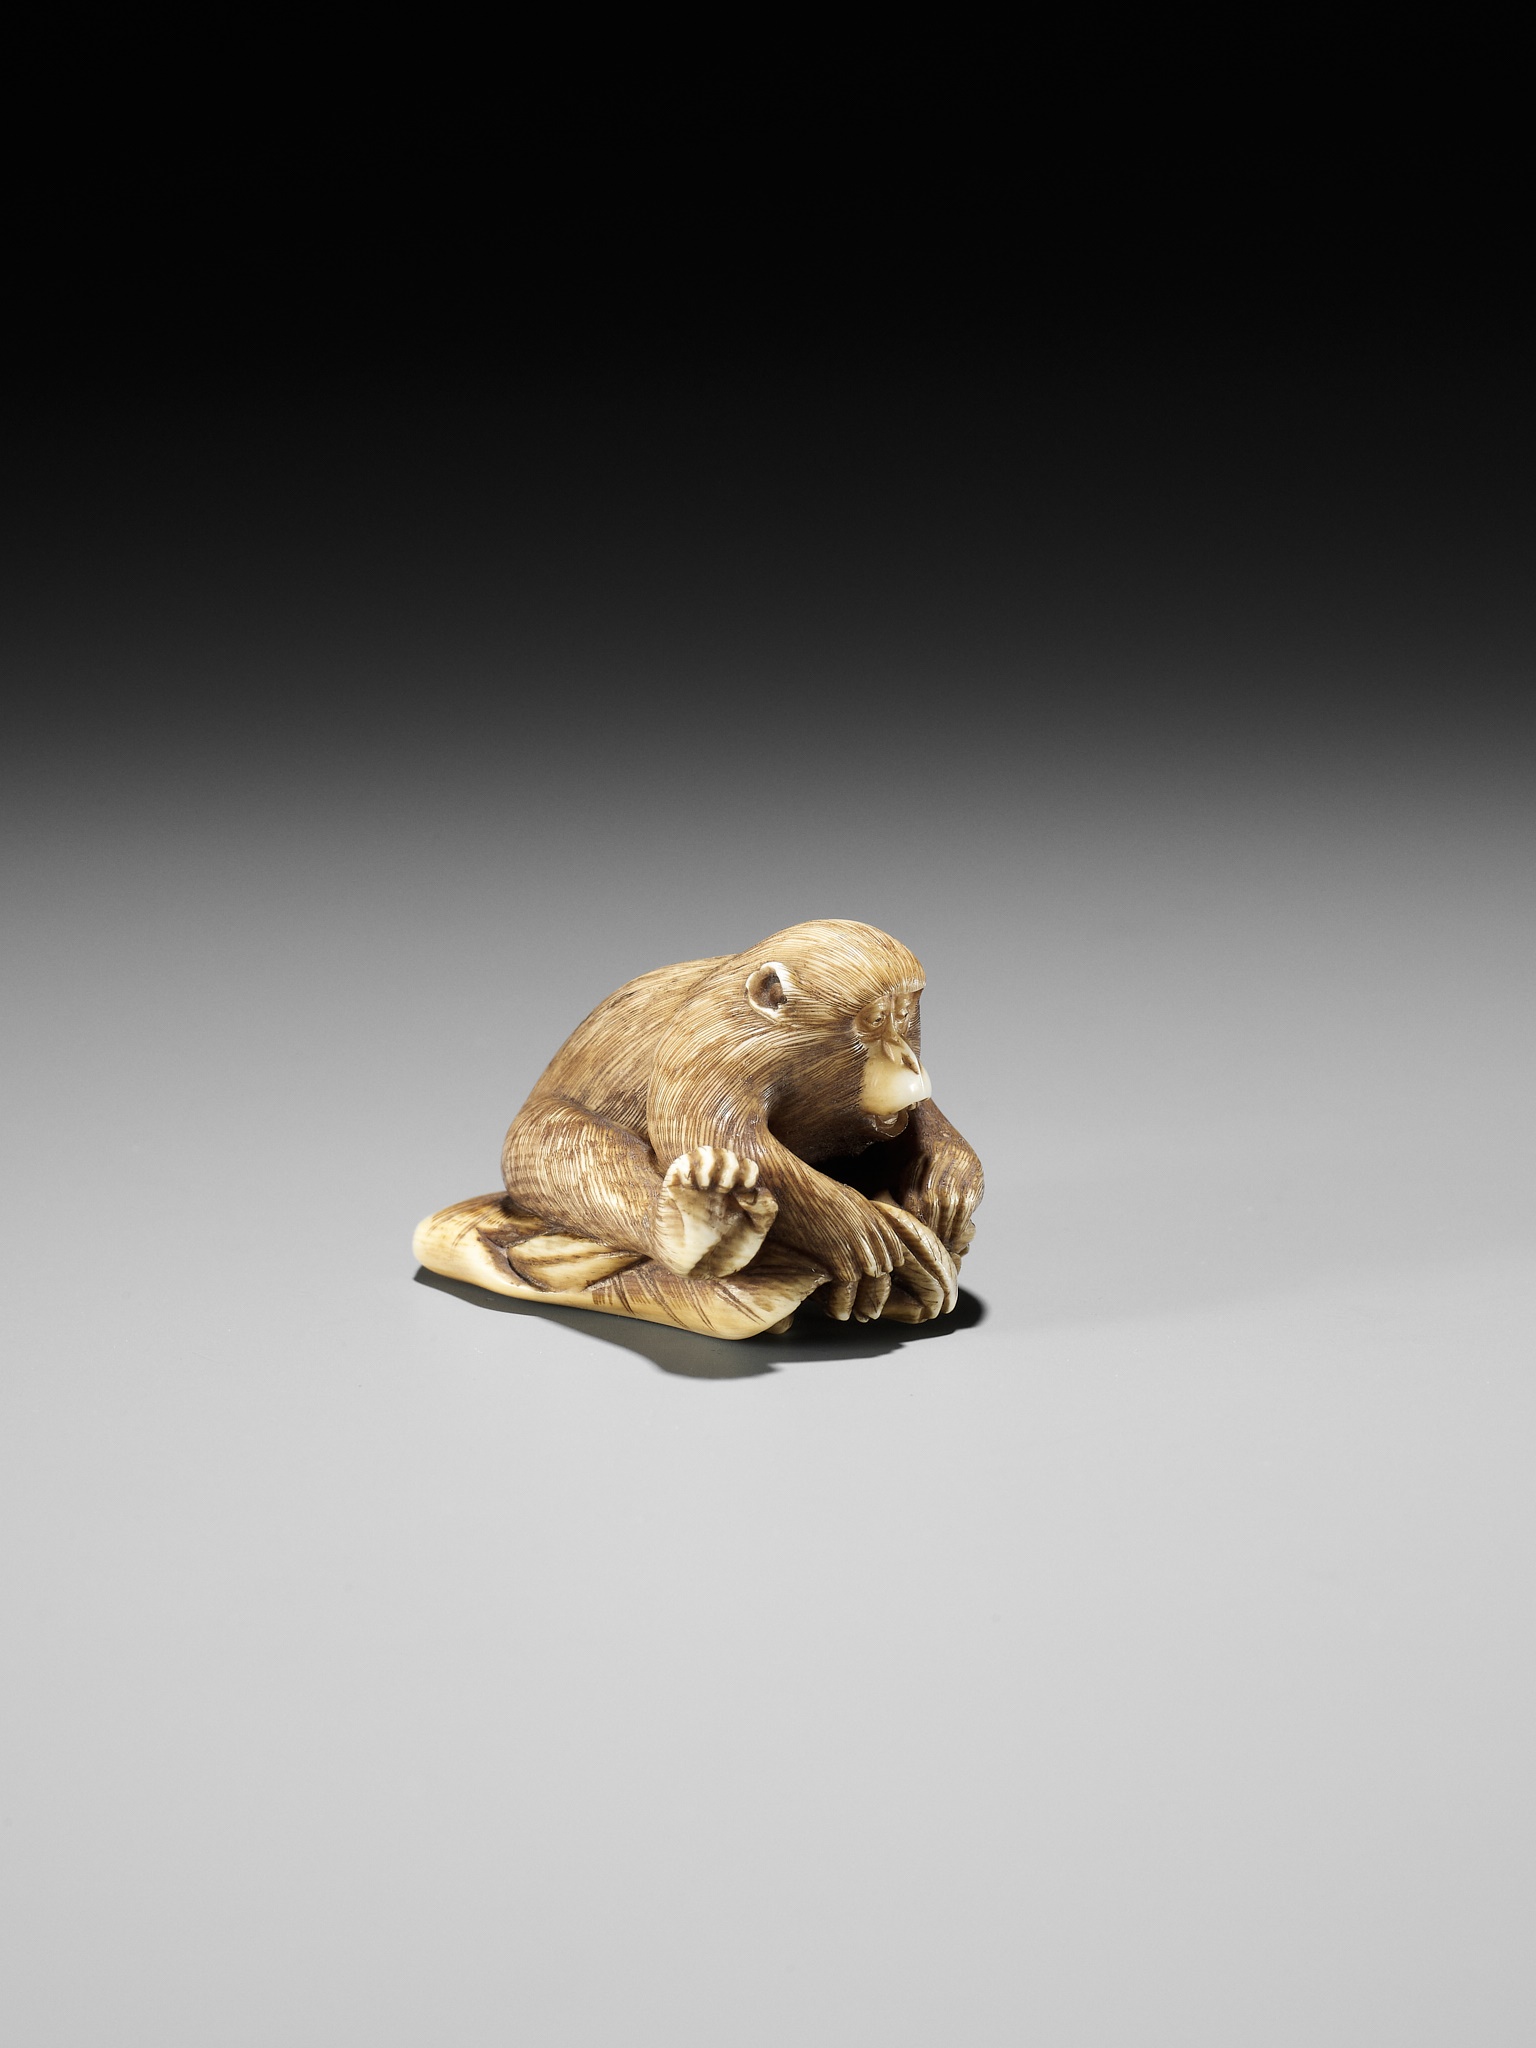 AN IVORY NETSUKE OF A MONKEY, CRAB AND LOTUS - Image 7 of 10